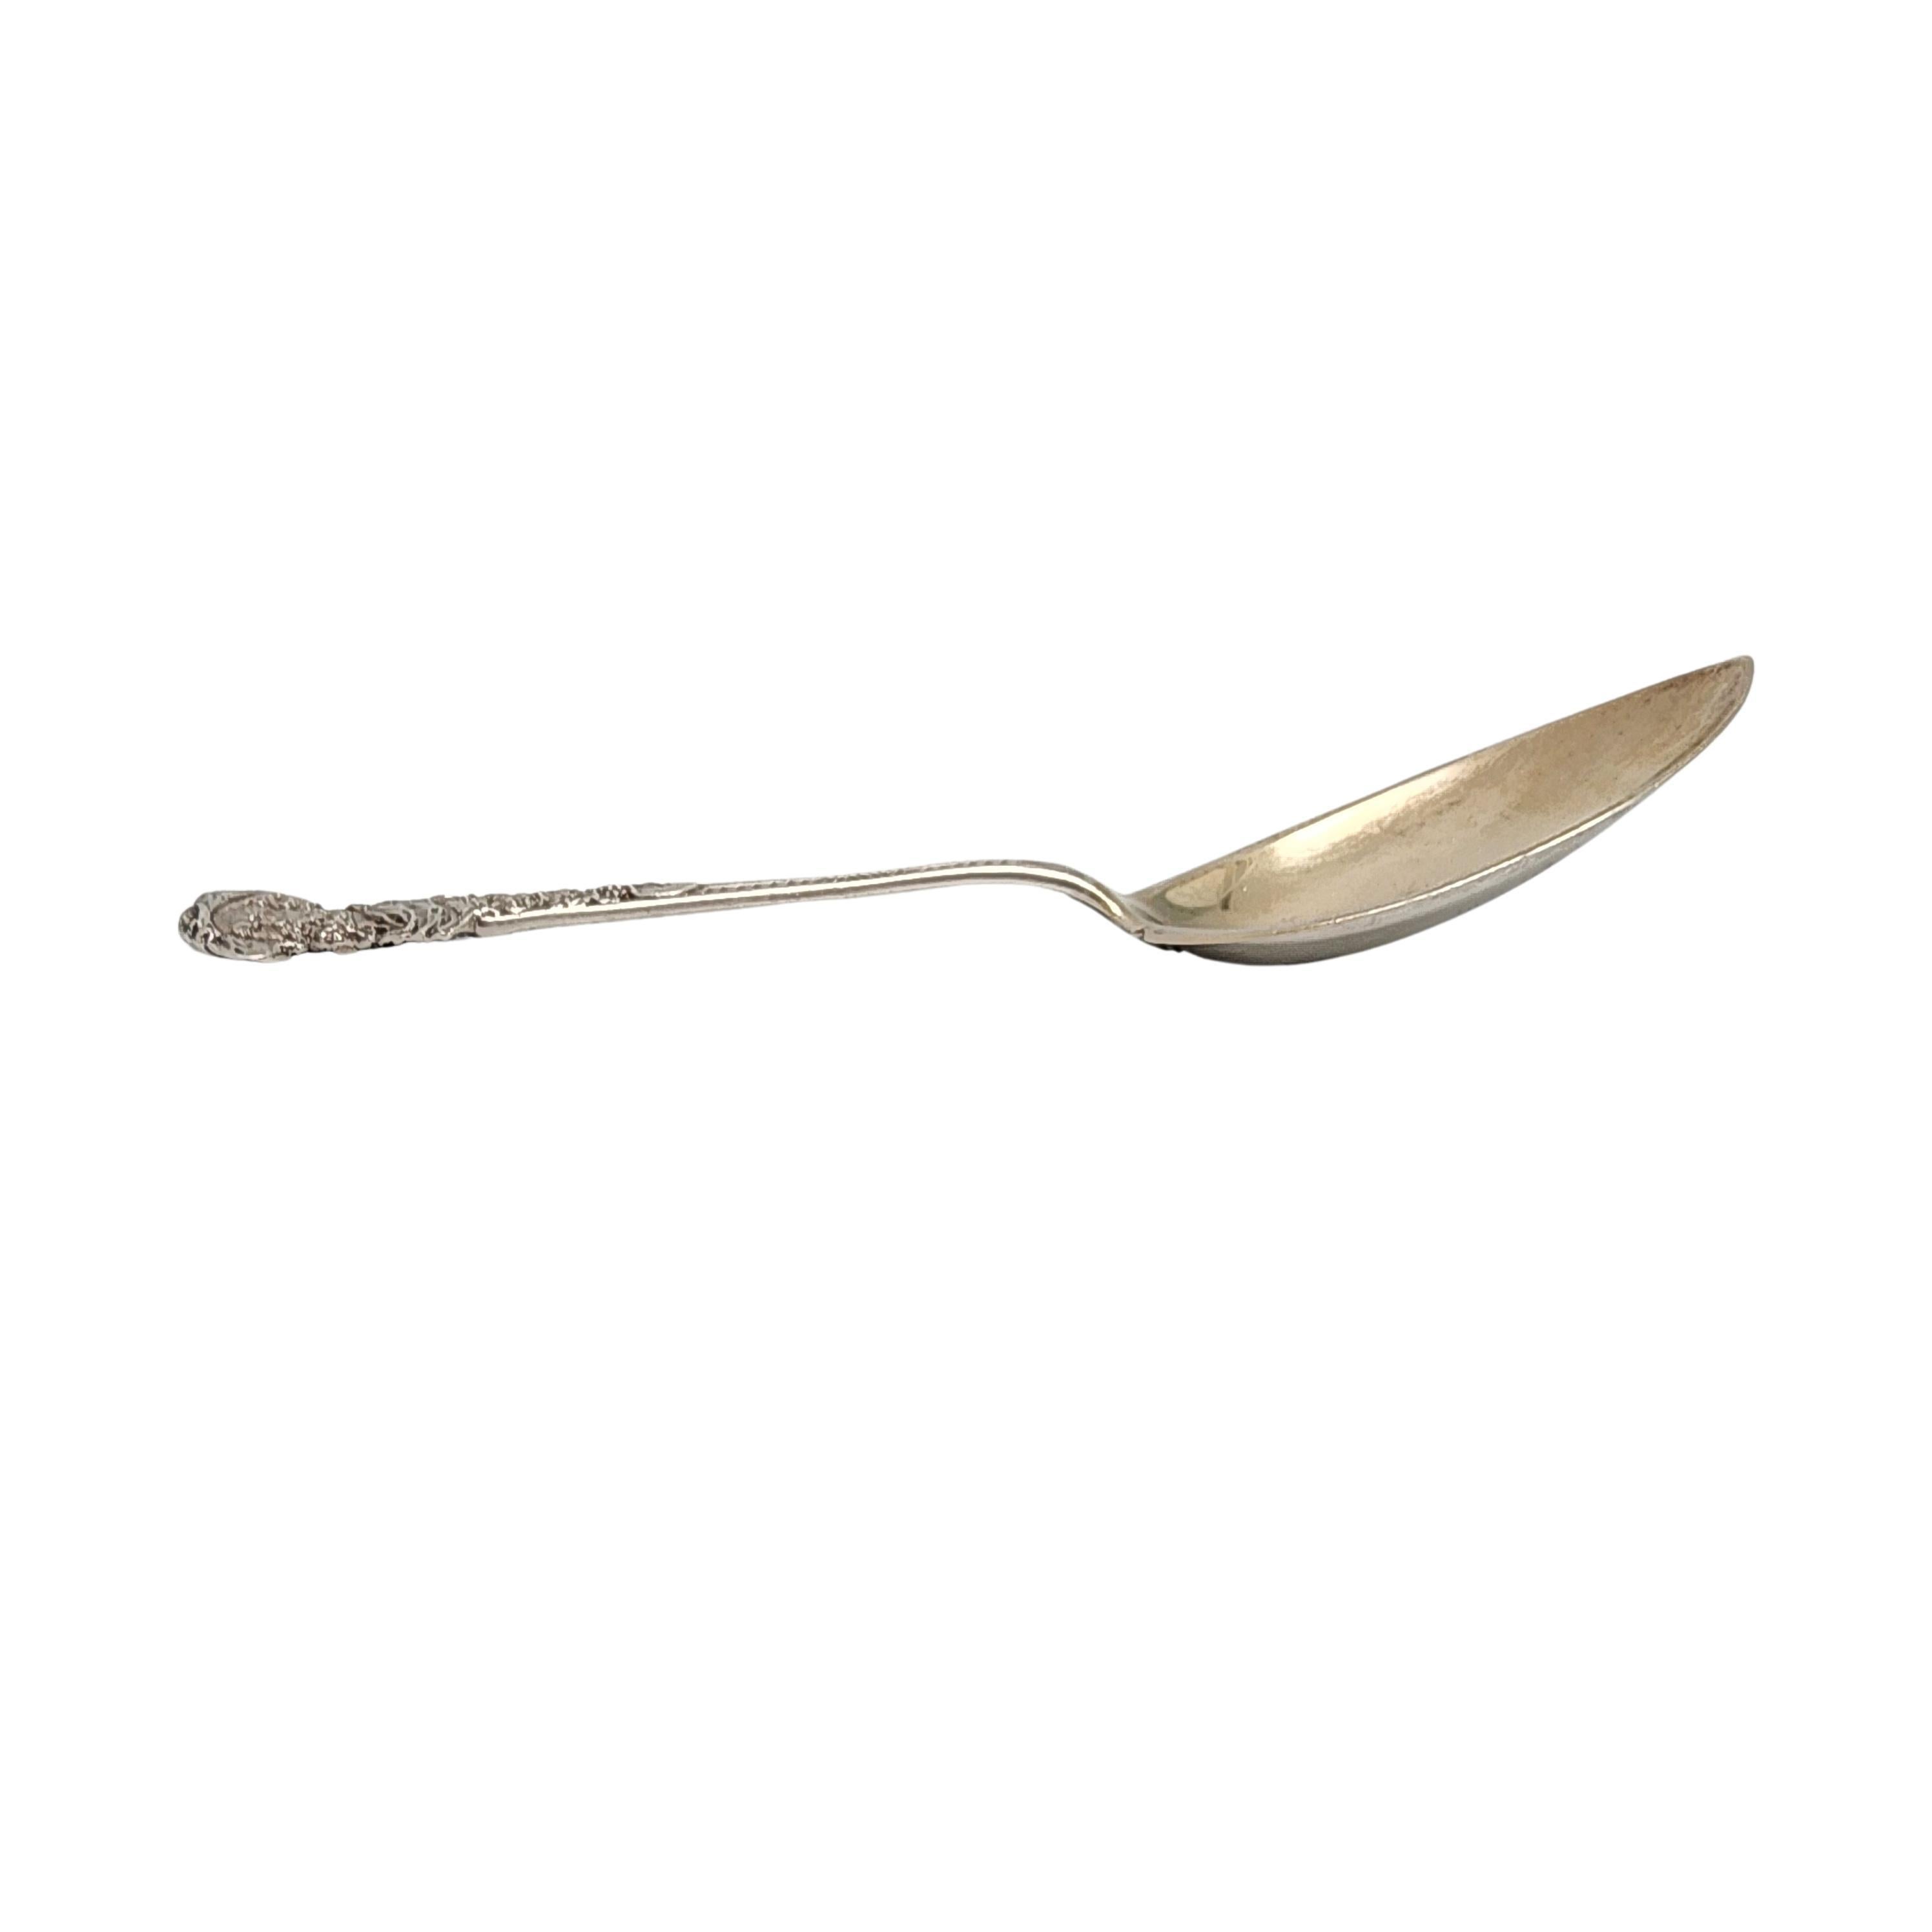 Gorham Old Masters Rubens Sterling Silver Berry Serving Spoon 8 3/4